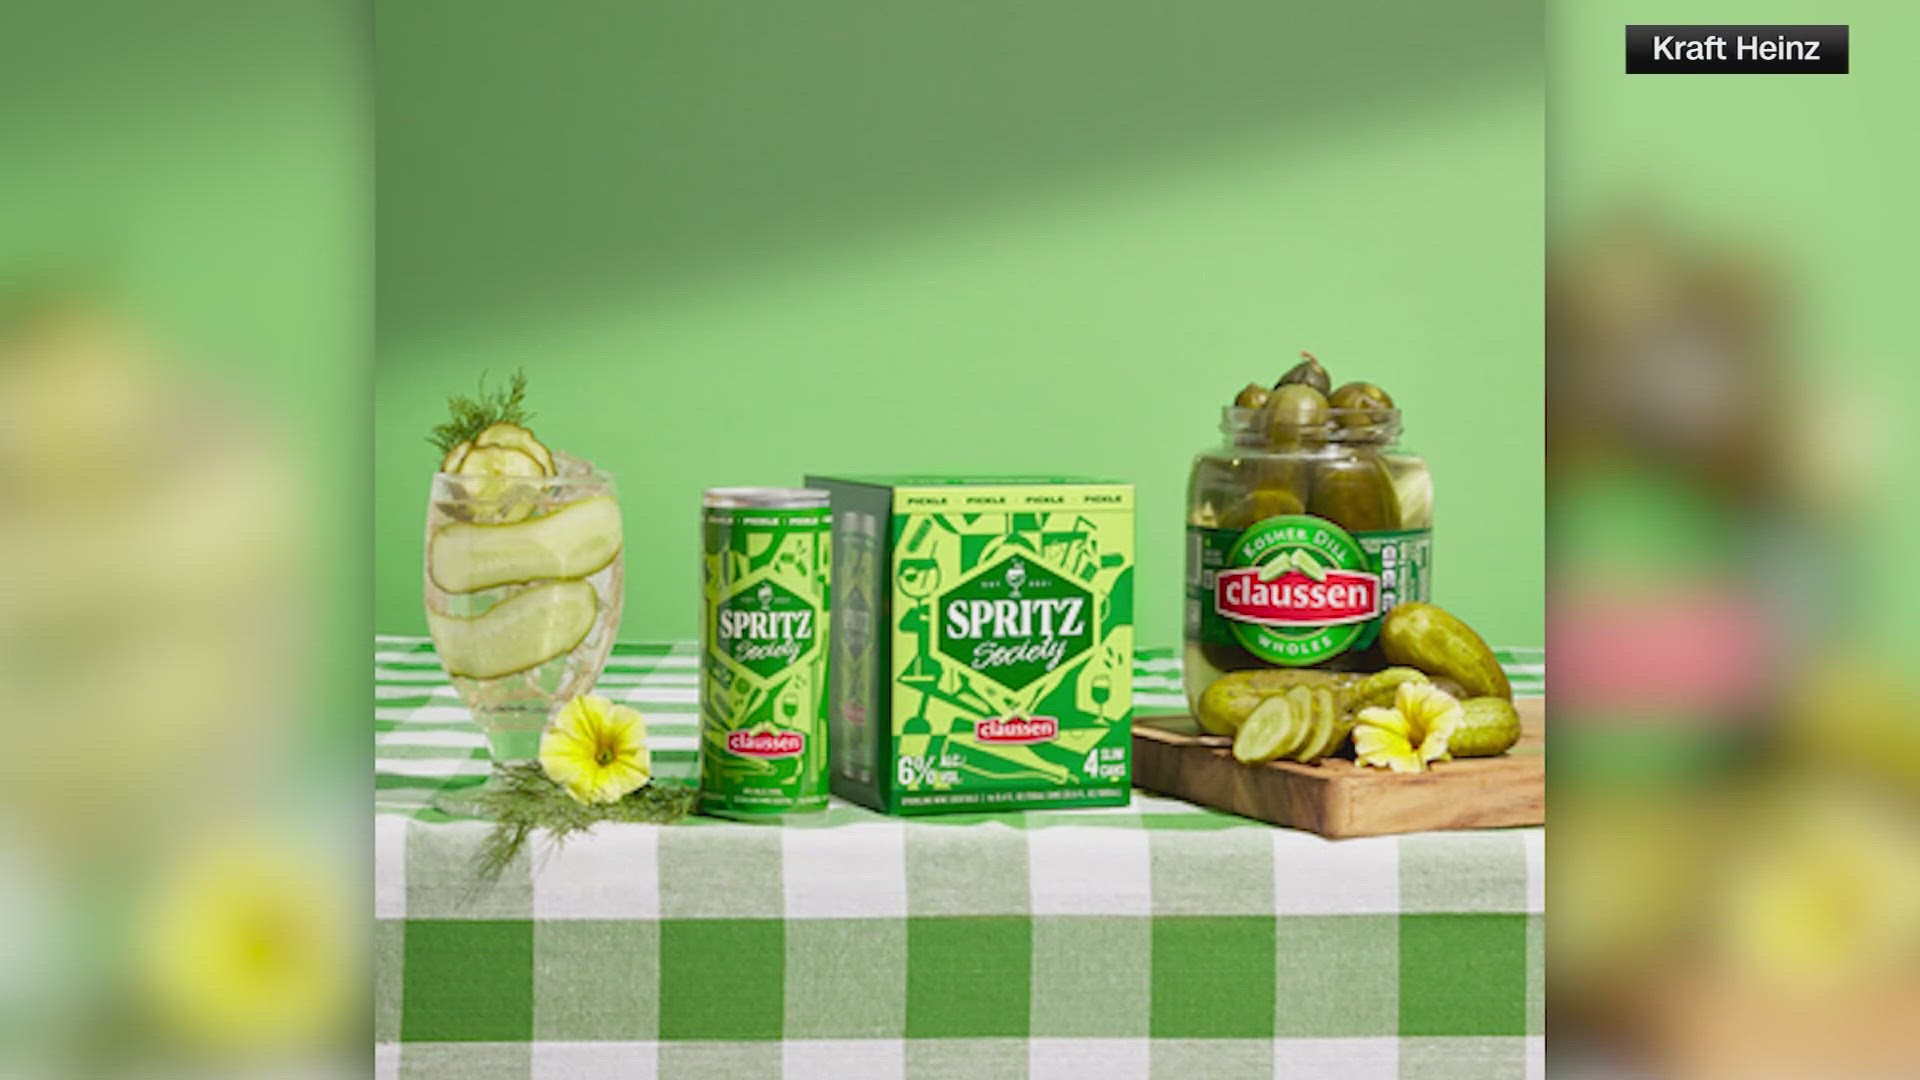 Claussen Pickles is teaming up with Spritz Society to create a drink with the company's signature pickle flavor.